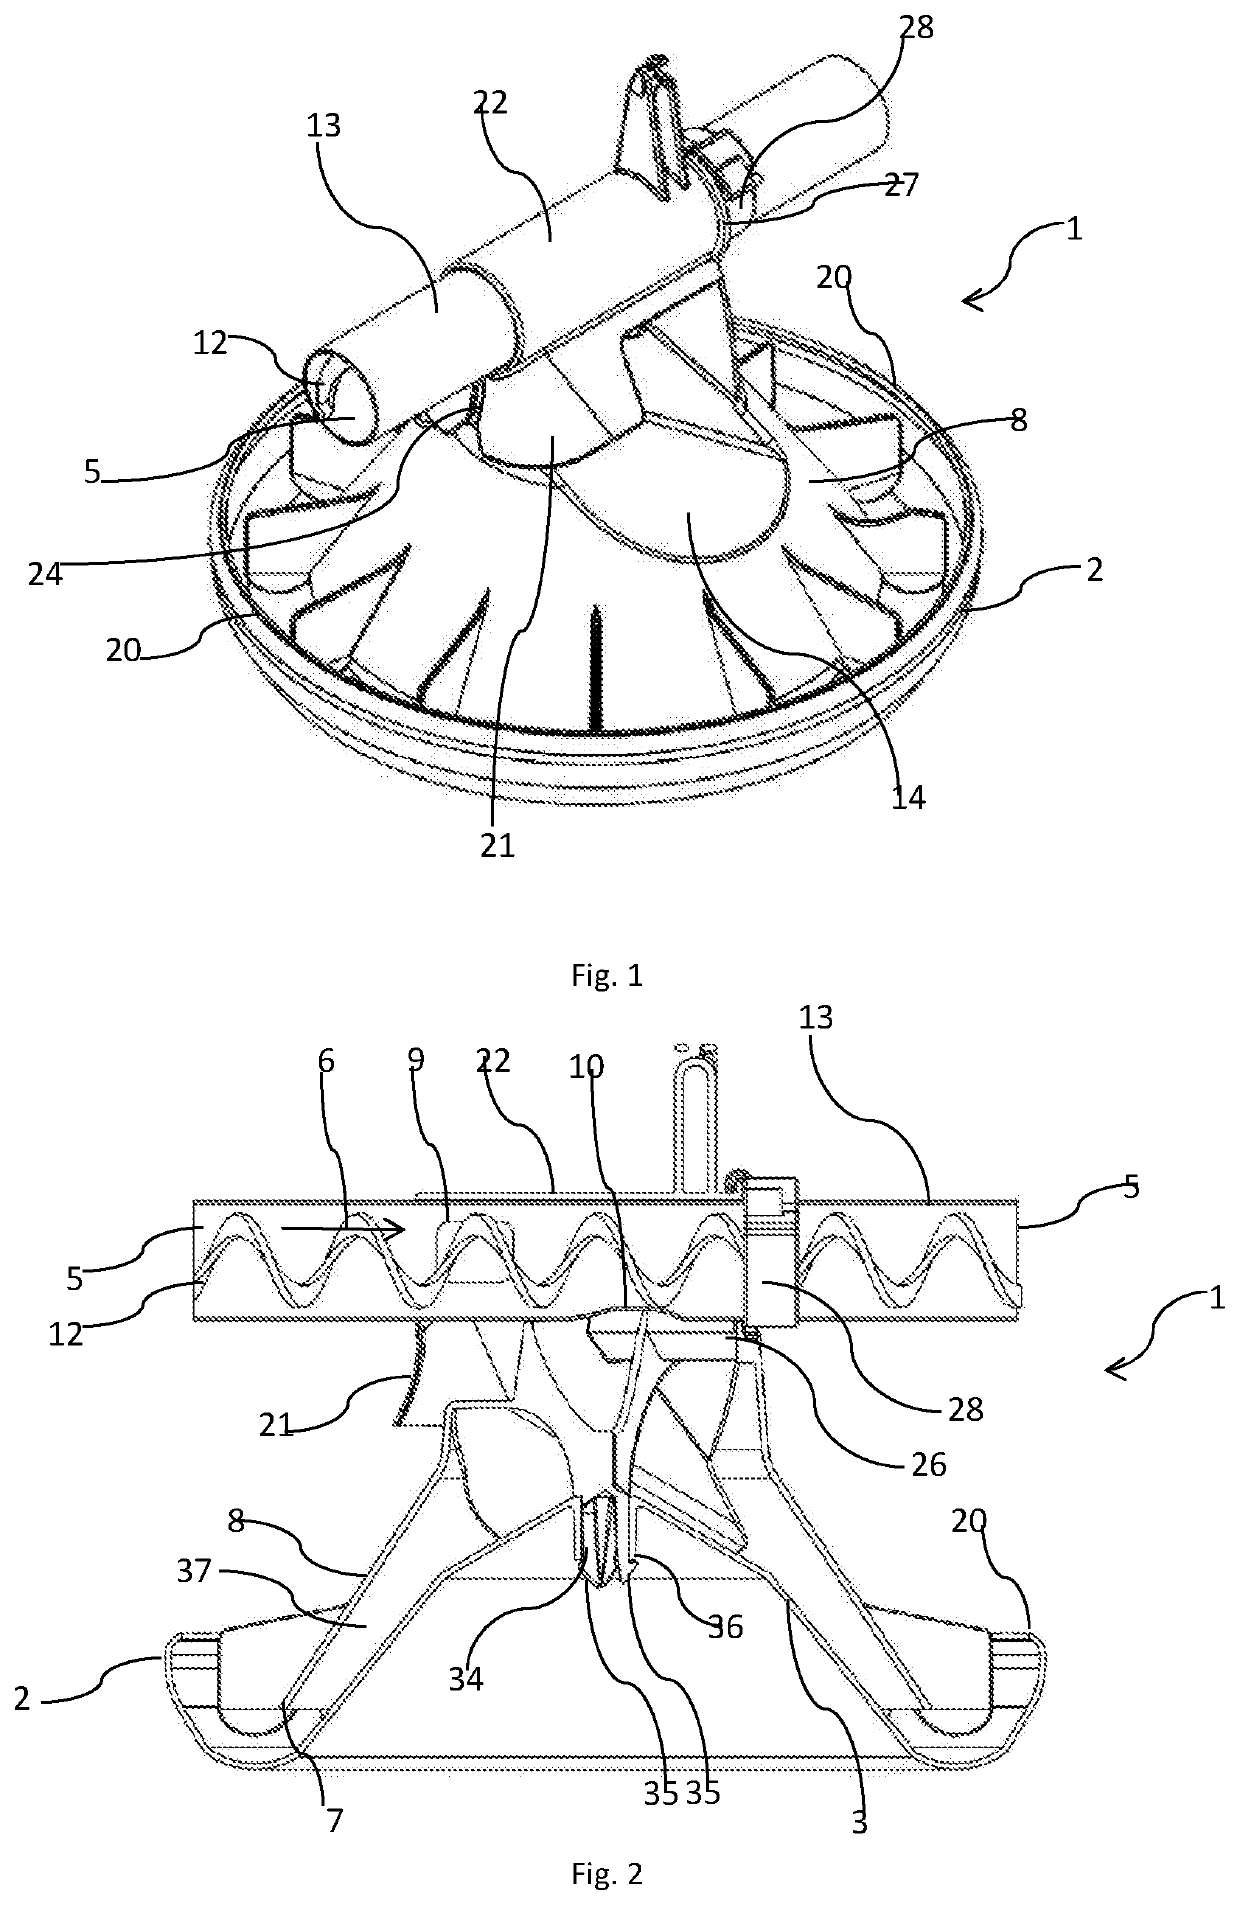 A method of filling feeding pans as well as a feeding system